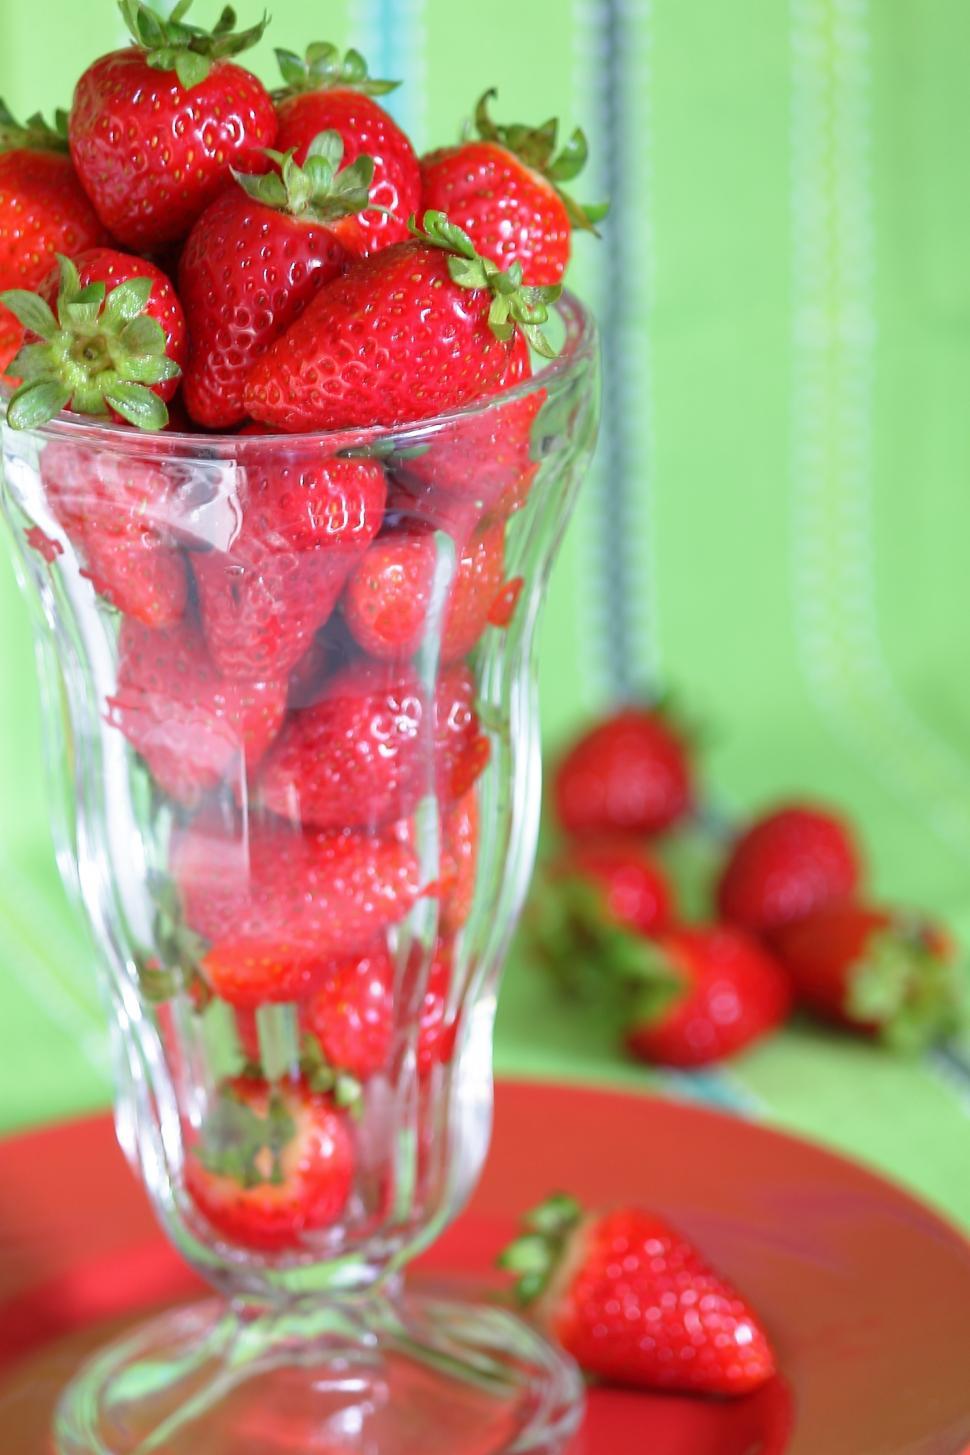 Free Image of Strawberries and green 